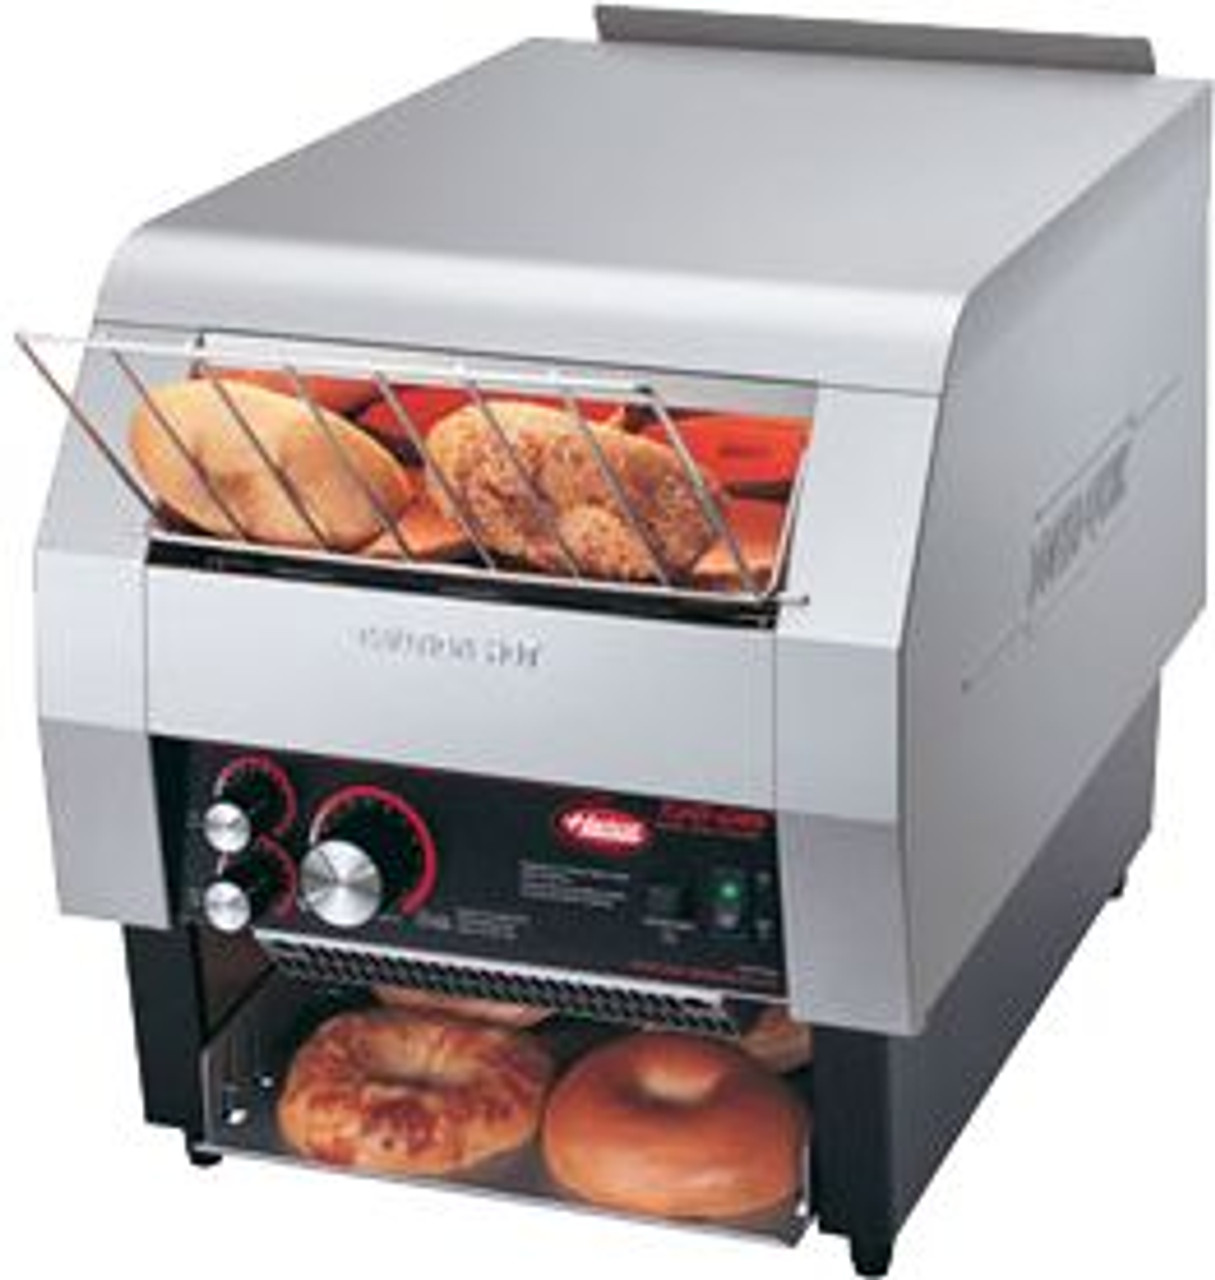 Hatco TQ-800HBA Toast-Qwik Conveyor Toaster - For Bagels and Buns